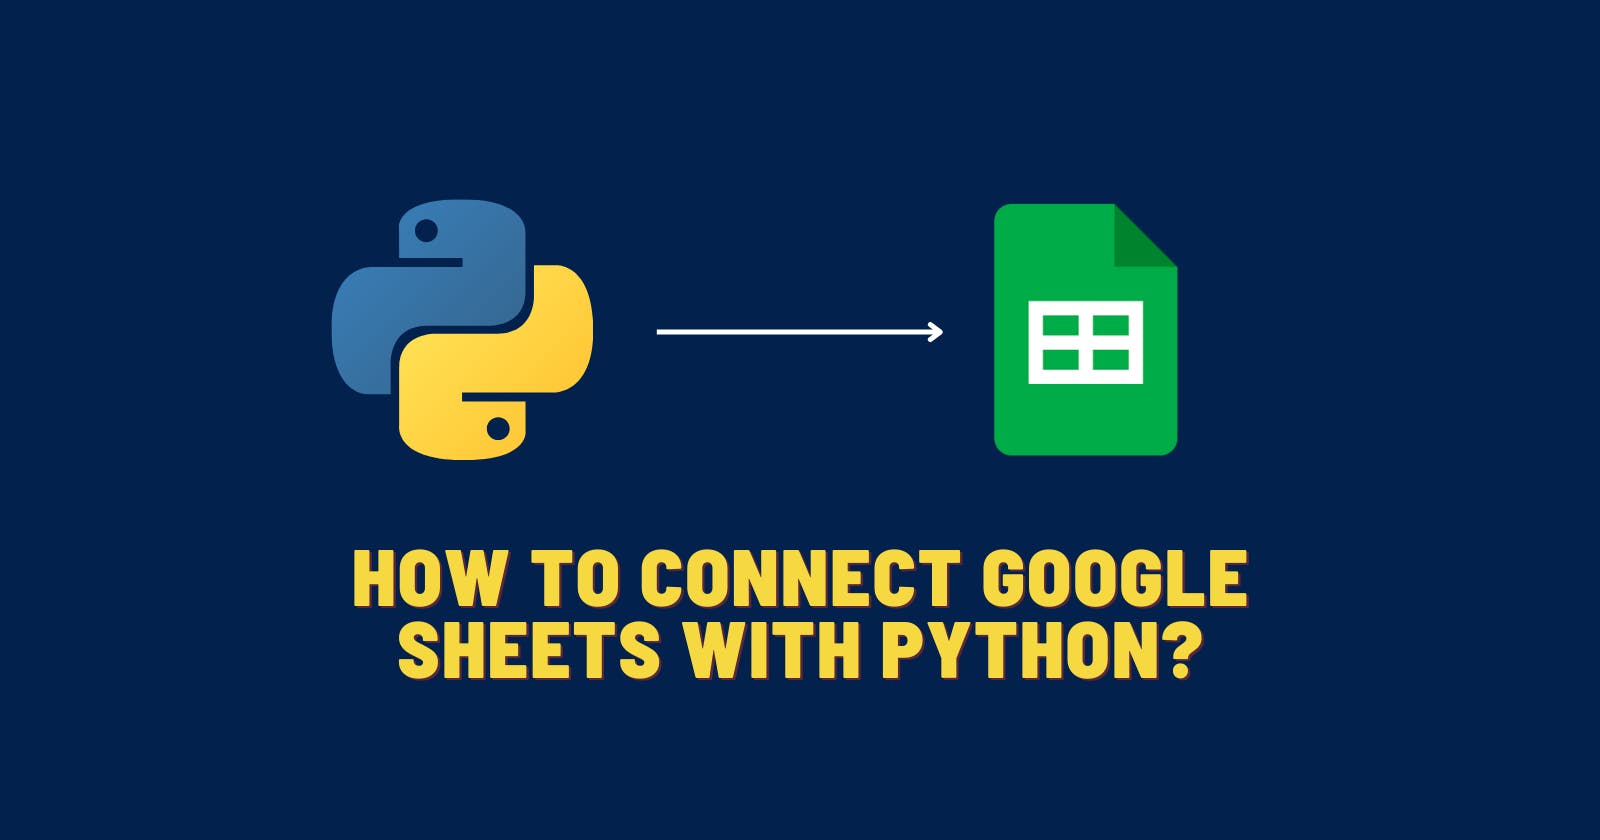 Connecting Python to Google Sheets